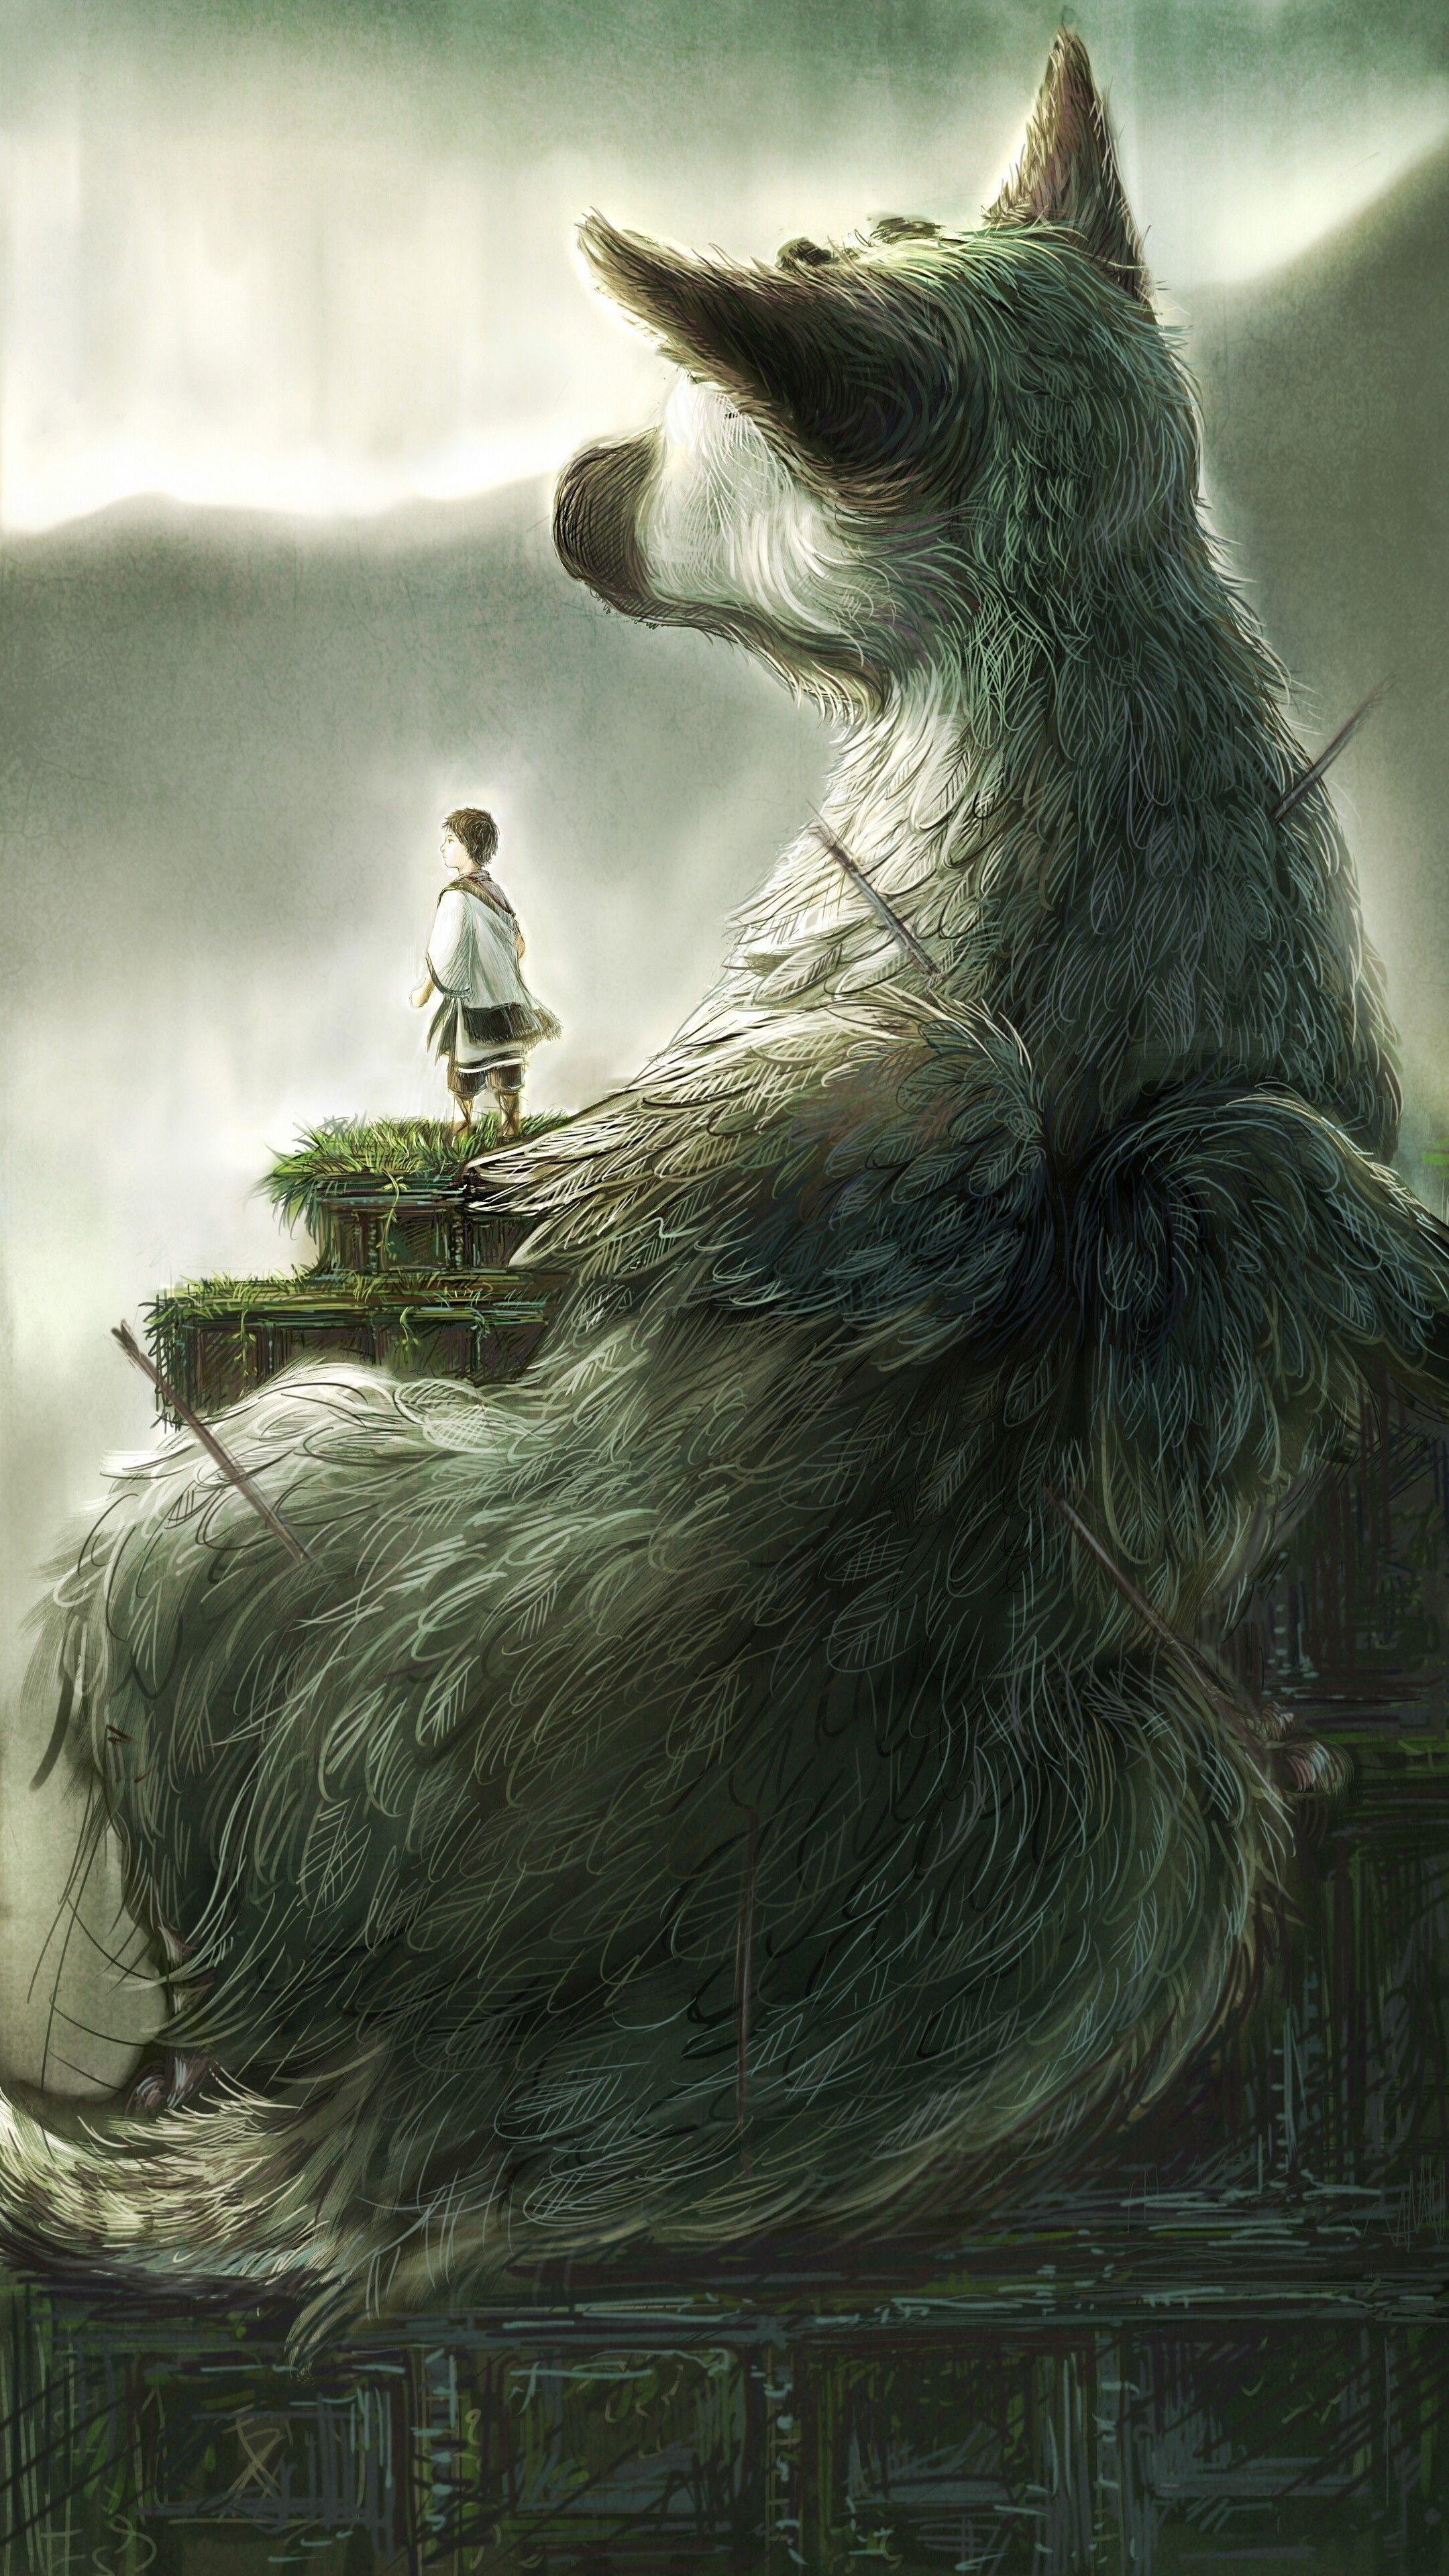 Ultra HD 4k Image For Mobile Anime 2160x3840 Wallpaper Pin On Anime Wallpaper. Trend. Shadow of the colossus, HD anime wallpaper, Art